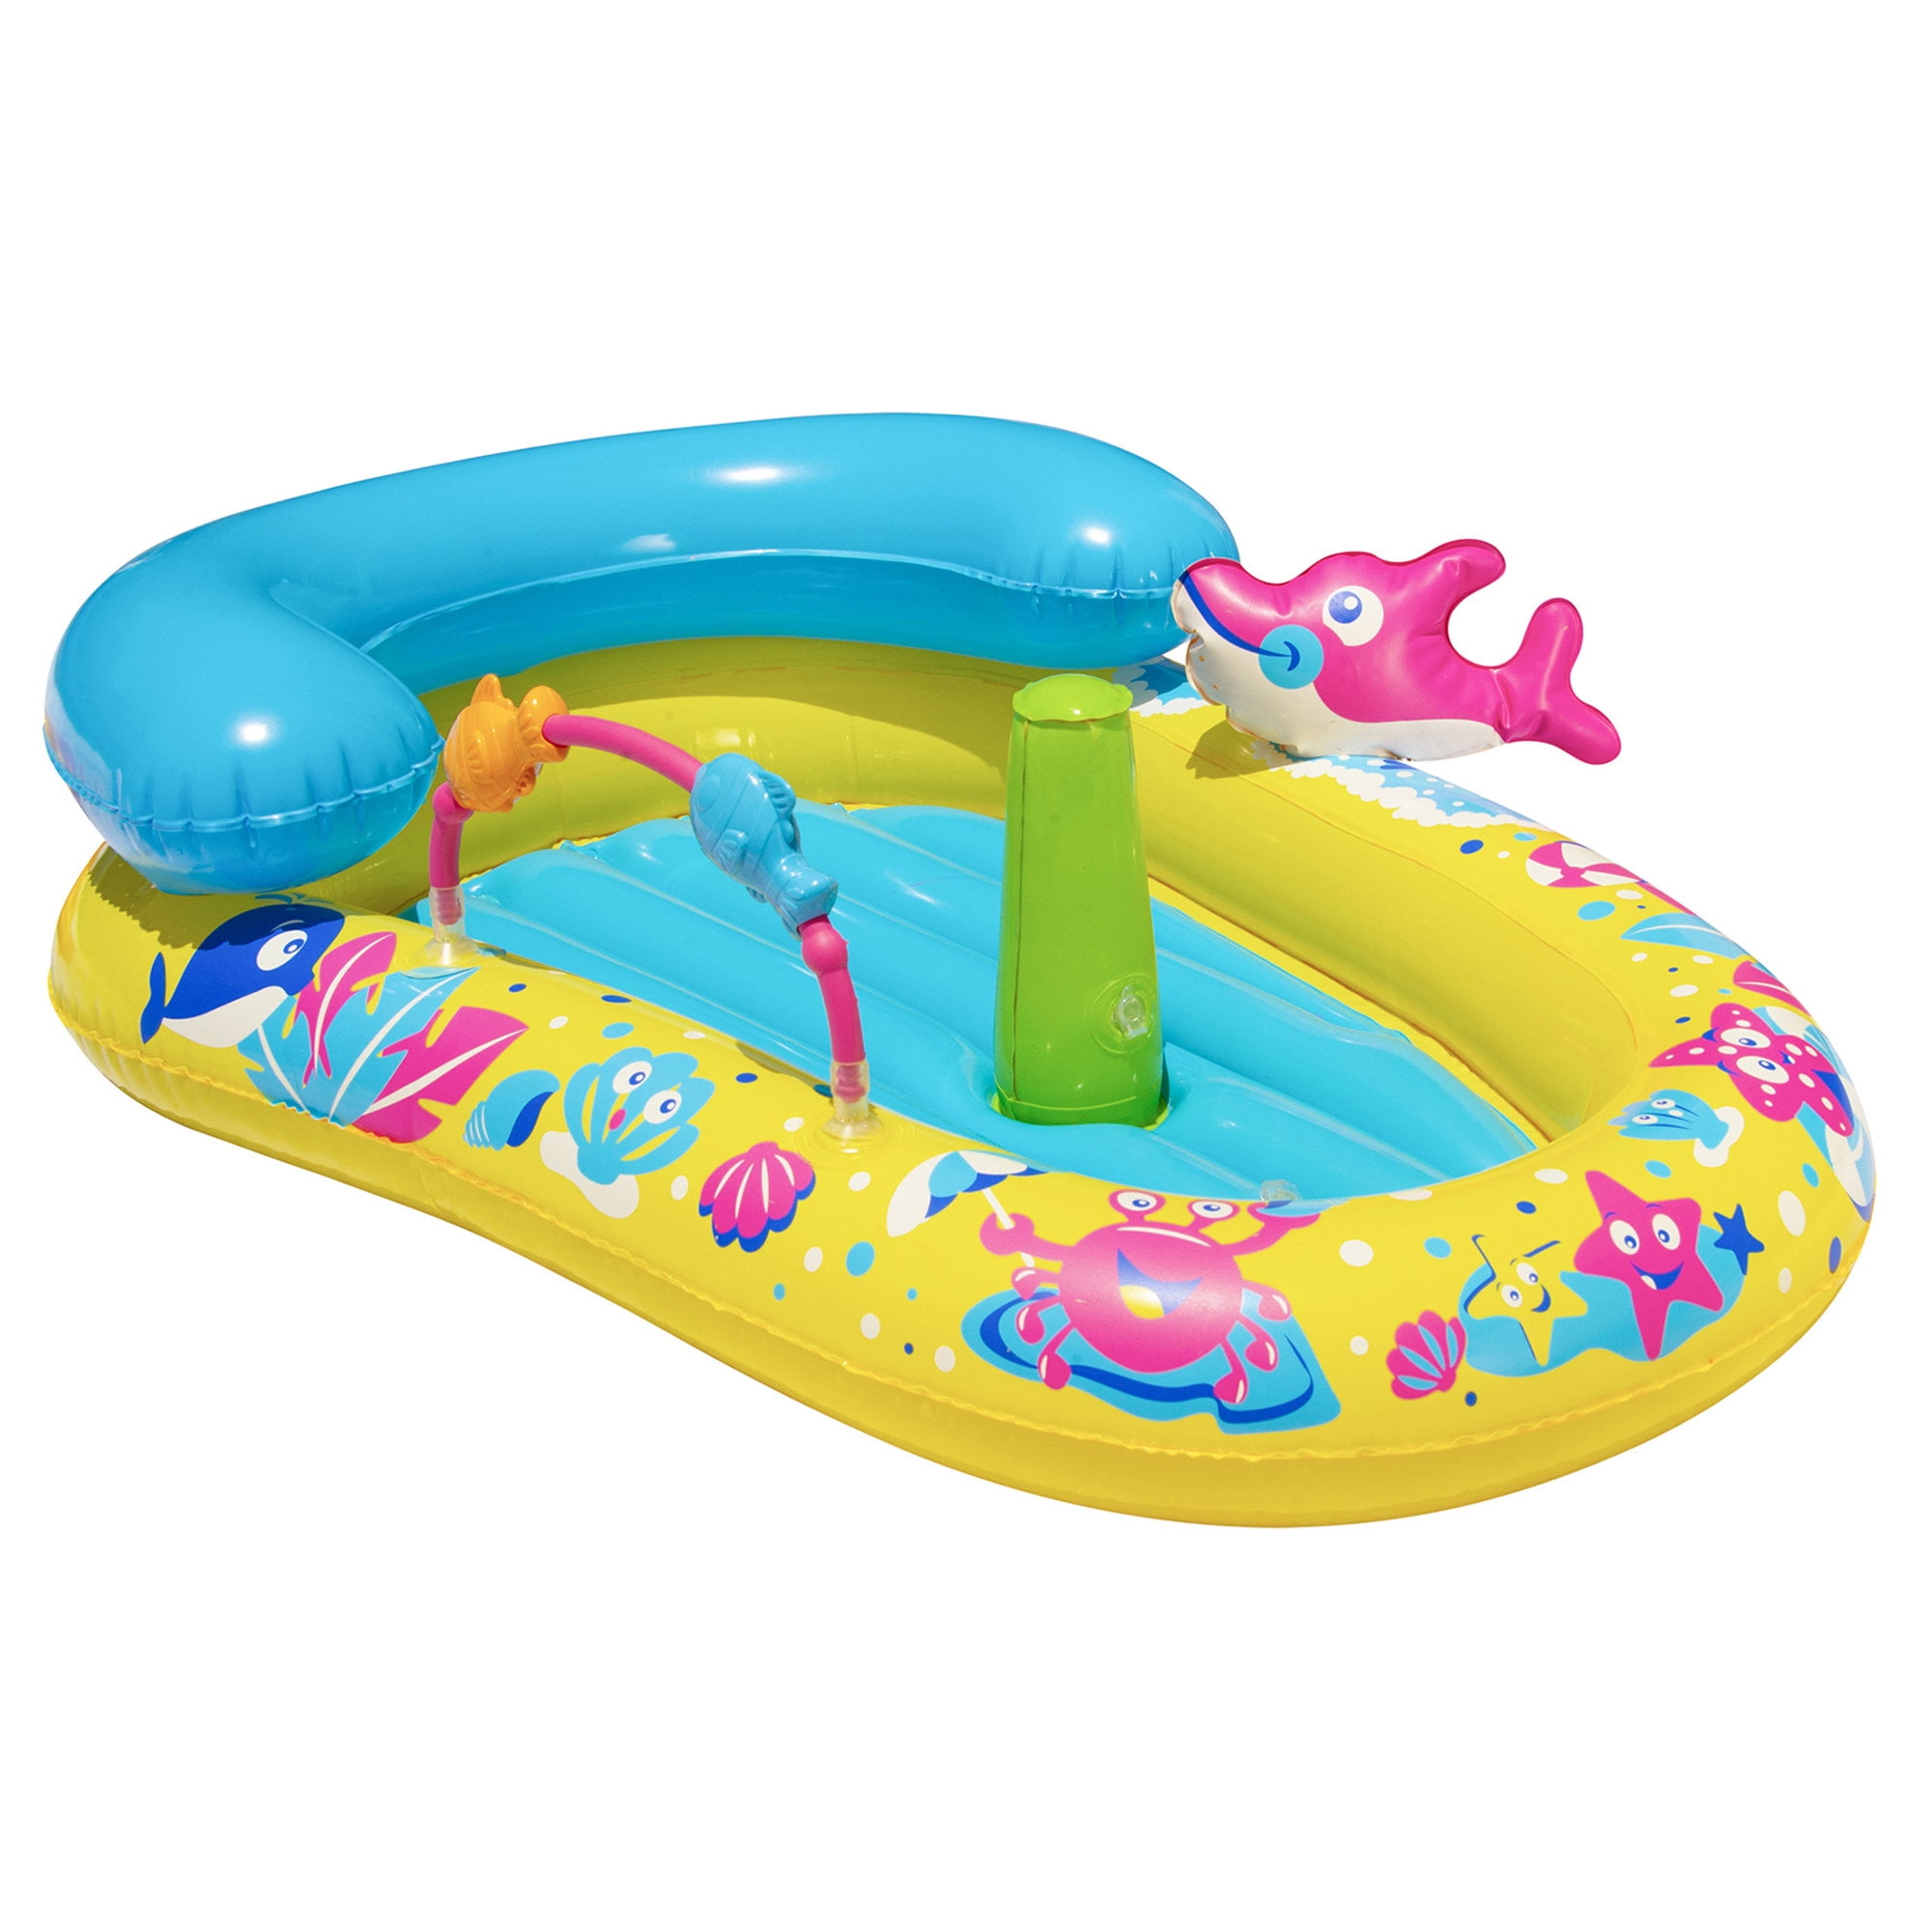 Newborn Baby Double Balloon Thickening Swimming Ring Lifebuoy Practical Best 